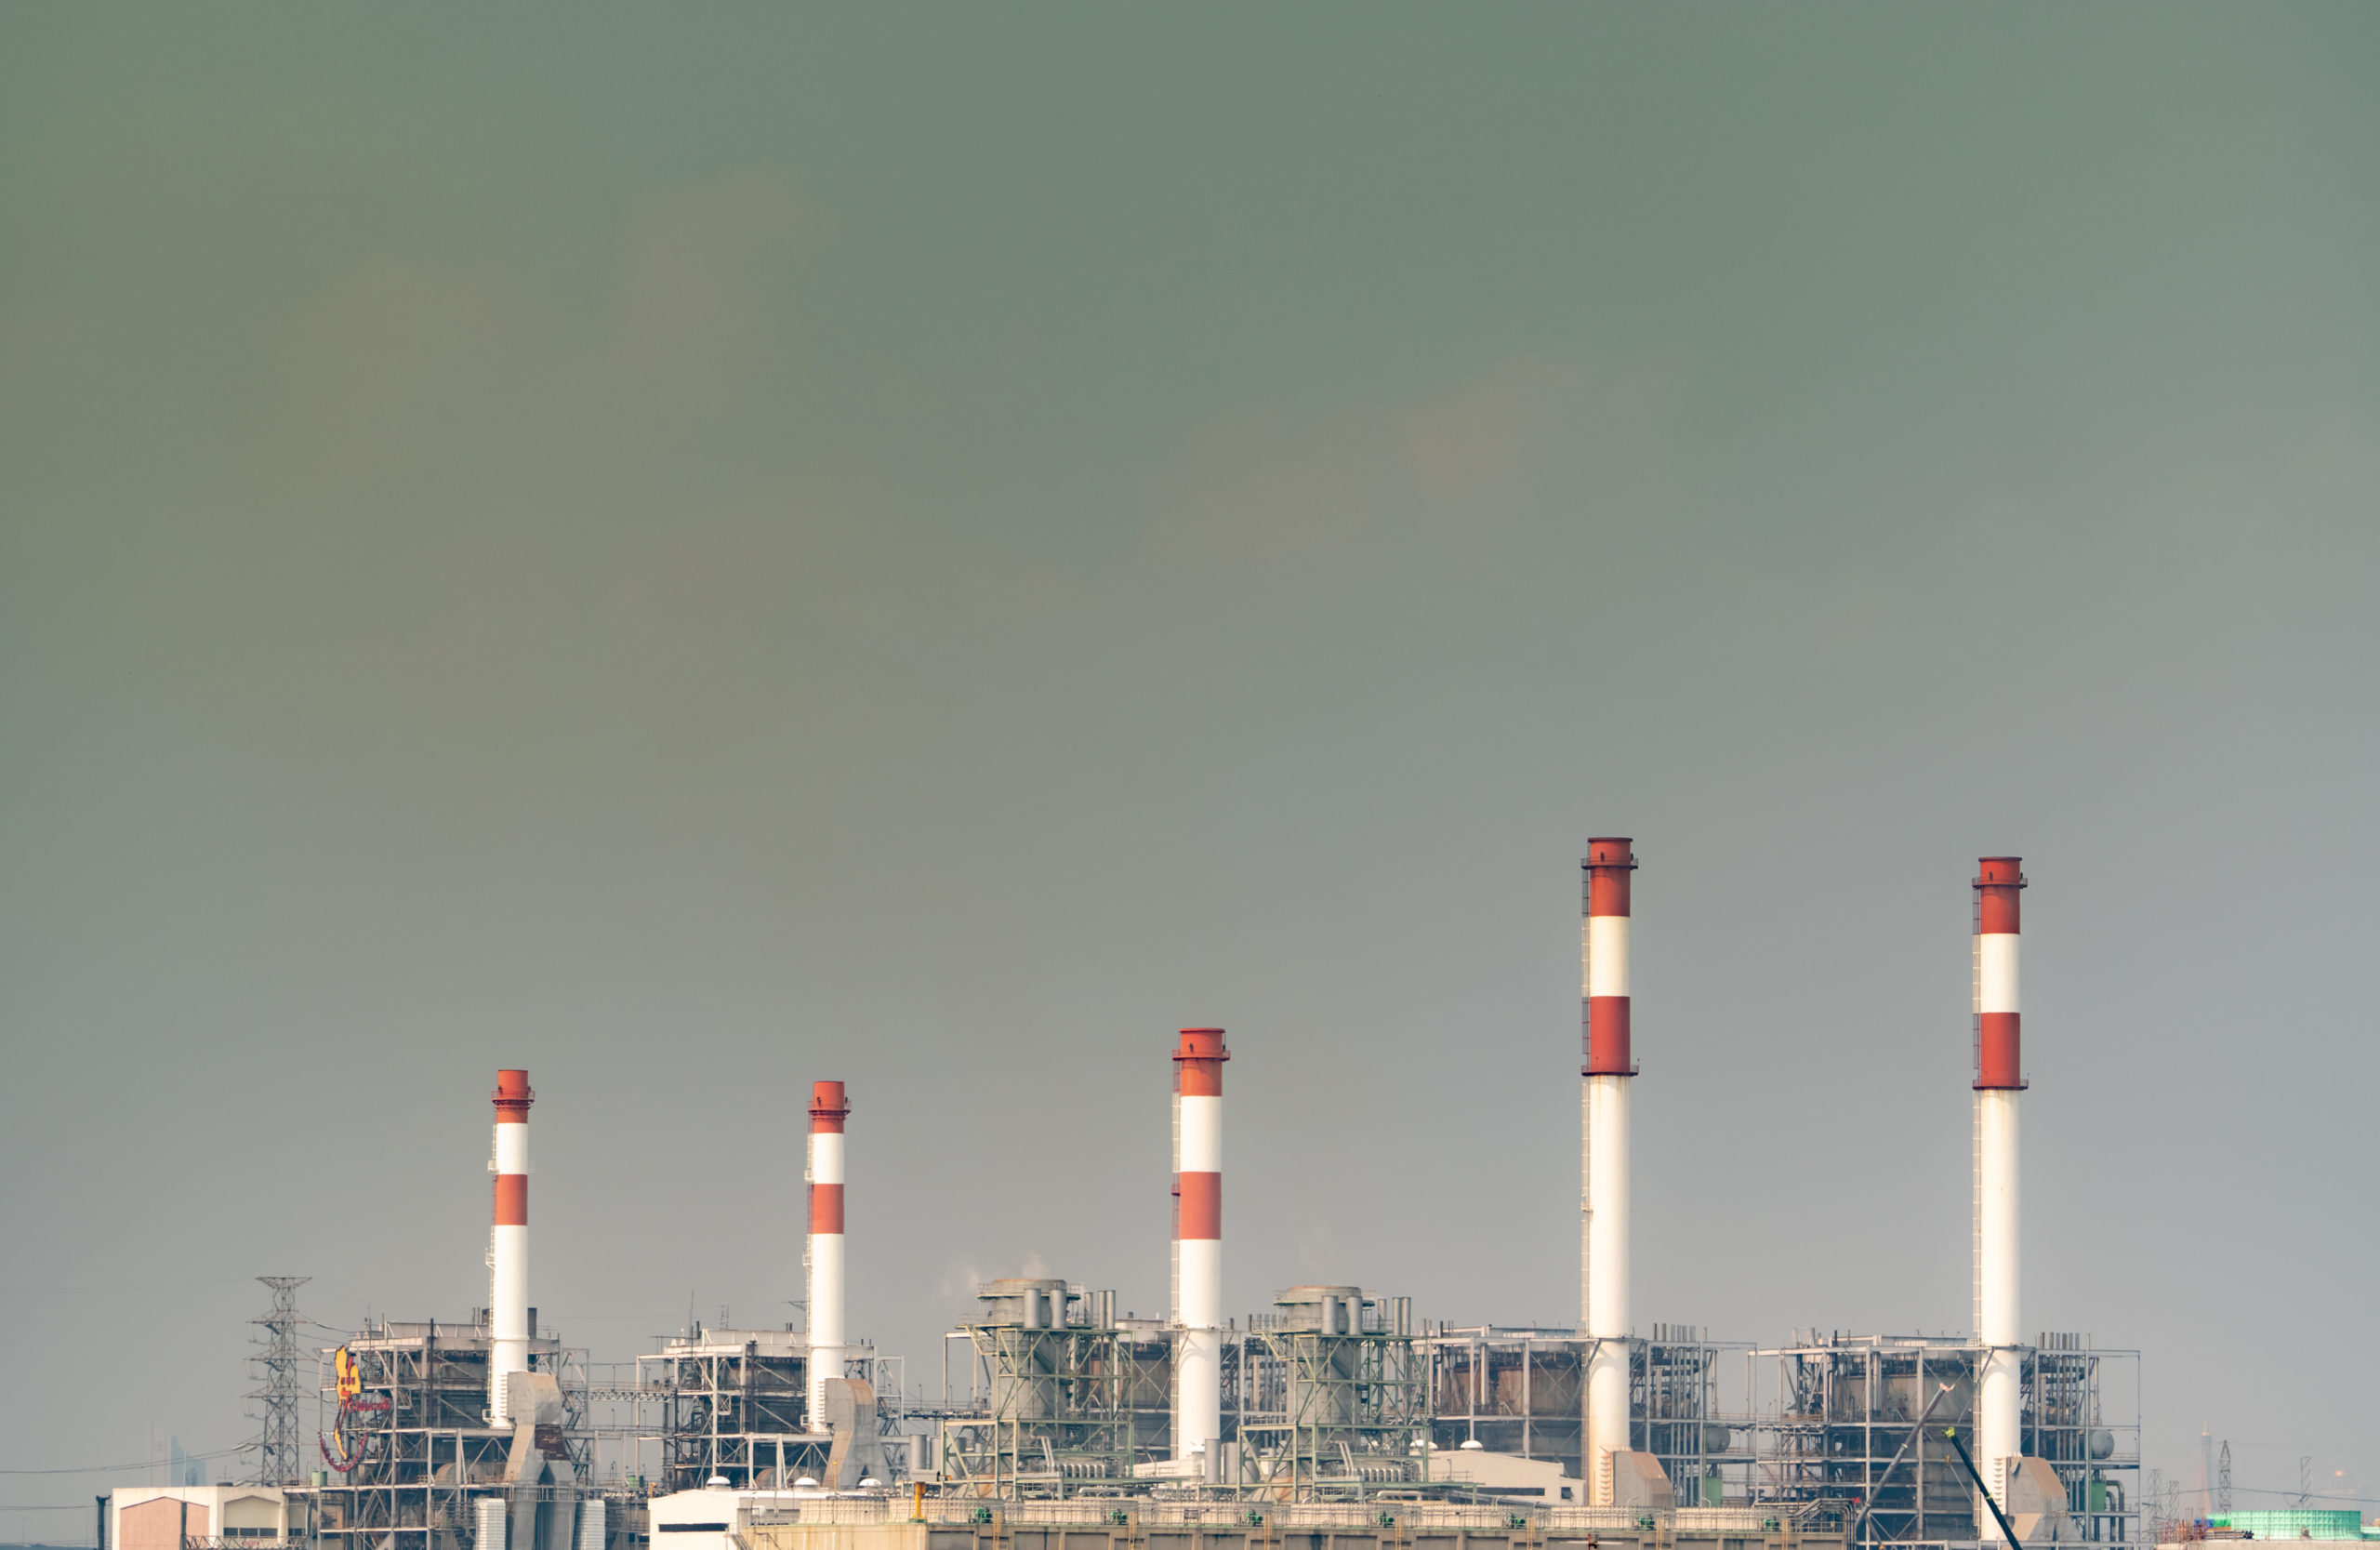 A gas power station in Thailand. The Hin Kong gas power plant, also in Thailand, was dropped by the AIIB in early February. (Image: Fahroni / Alamy)